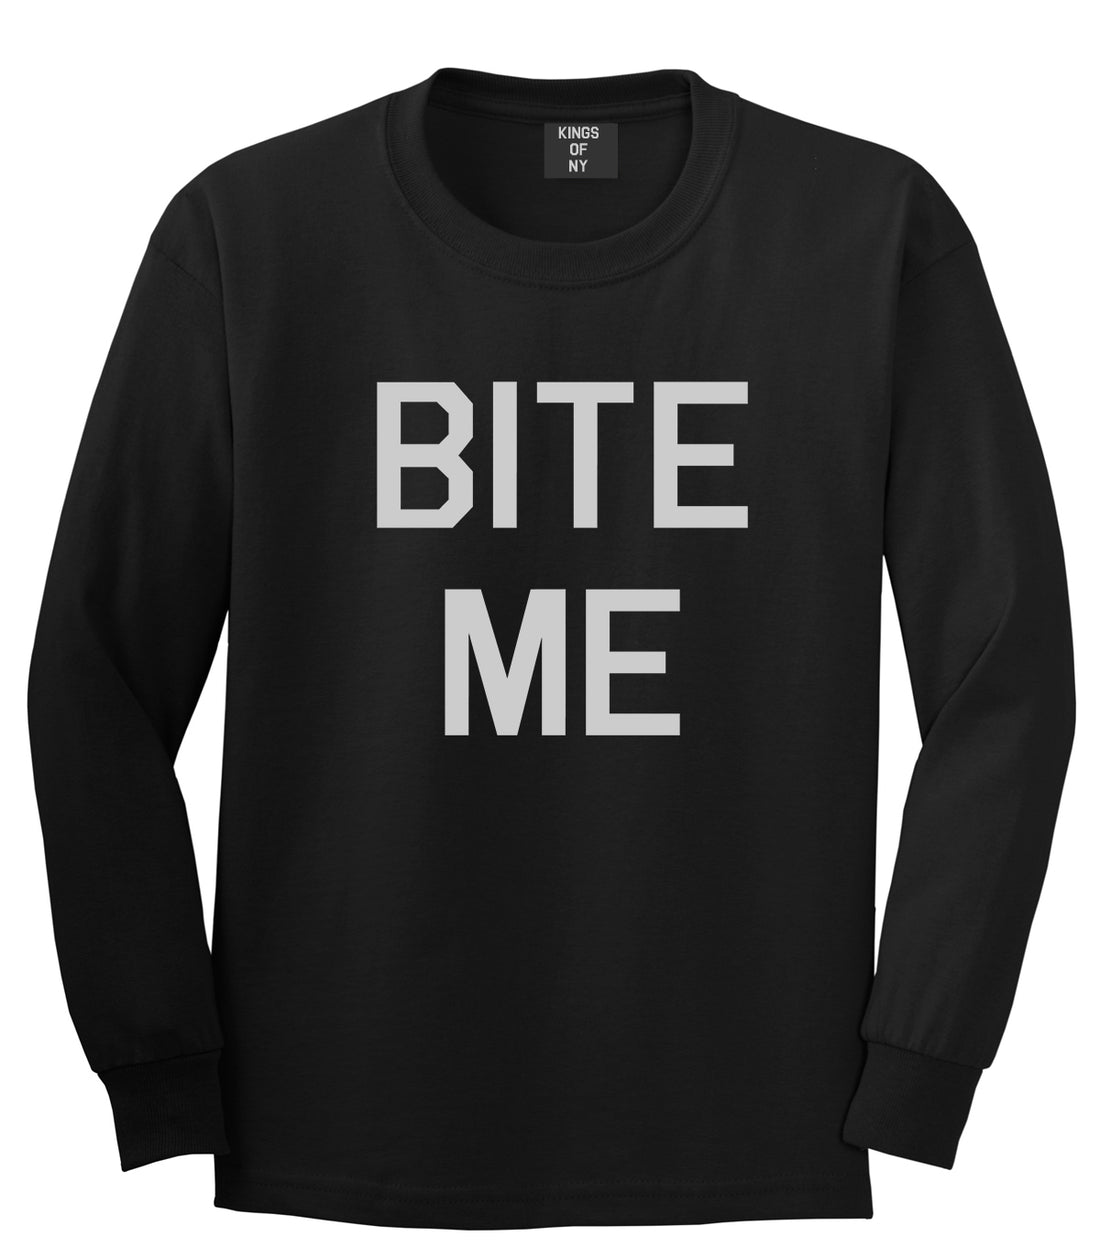 Bite Me Black Long Sleeve T-Shirt by Kings Of NY